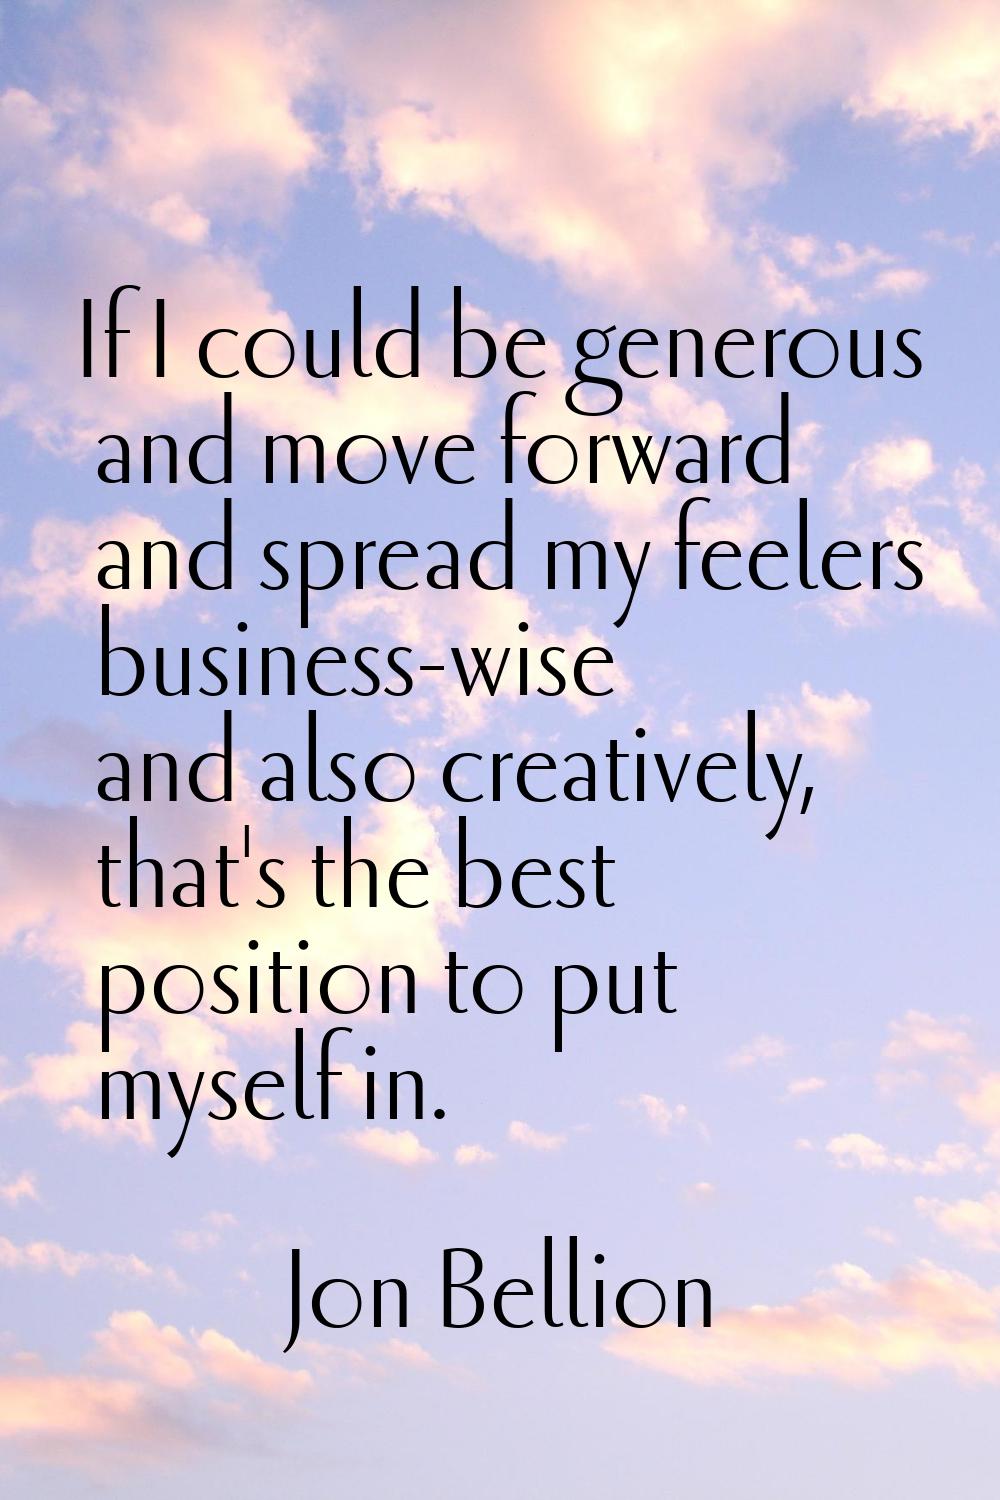 If I could be generous and move forward and spread my feelers business-wise and also creatively, th